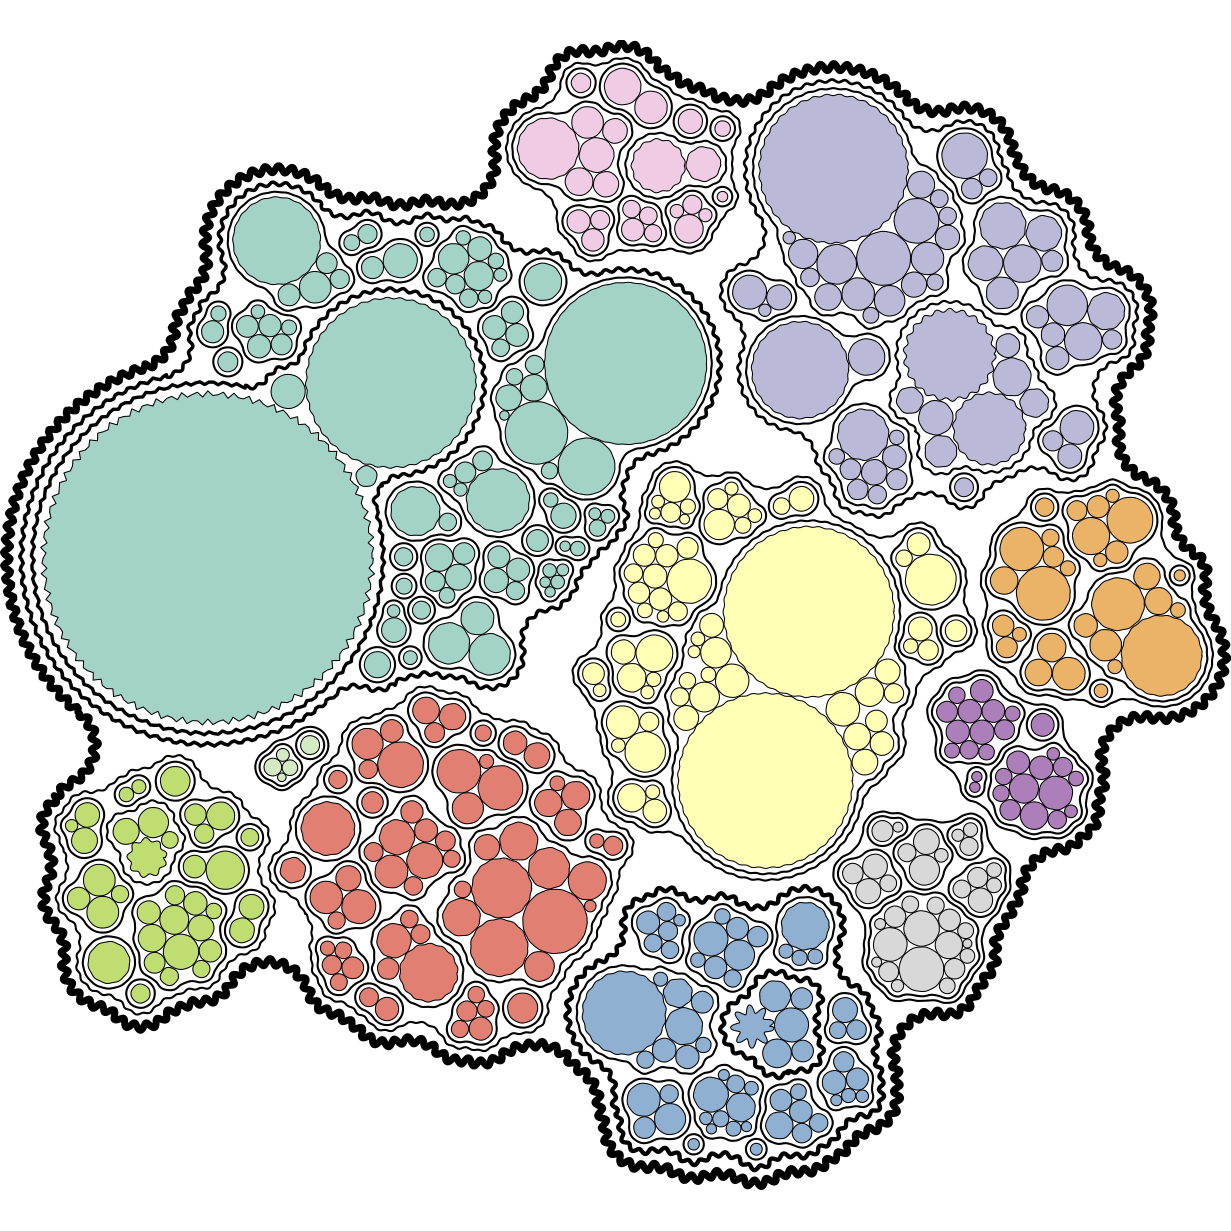 Bubble Treemaps for Uncertainty Visualization